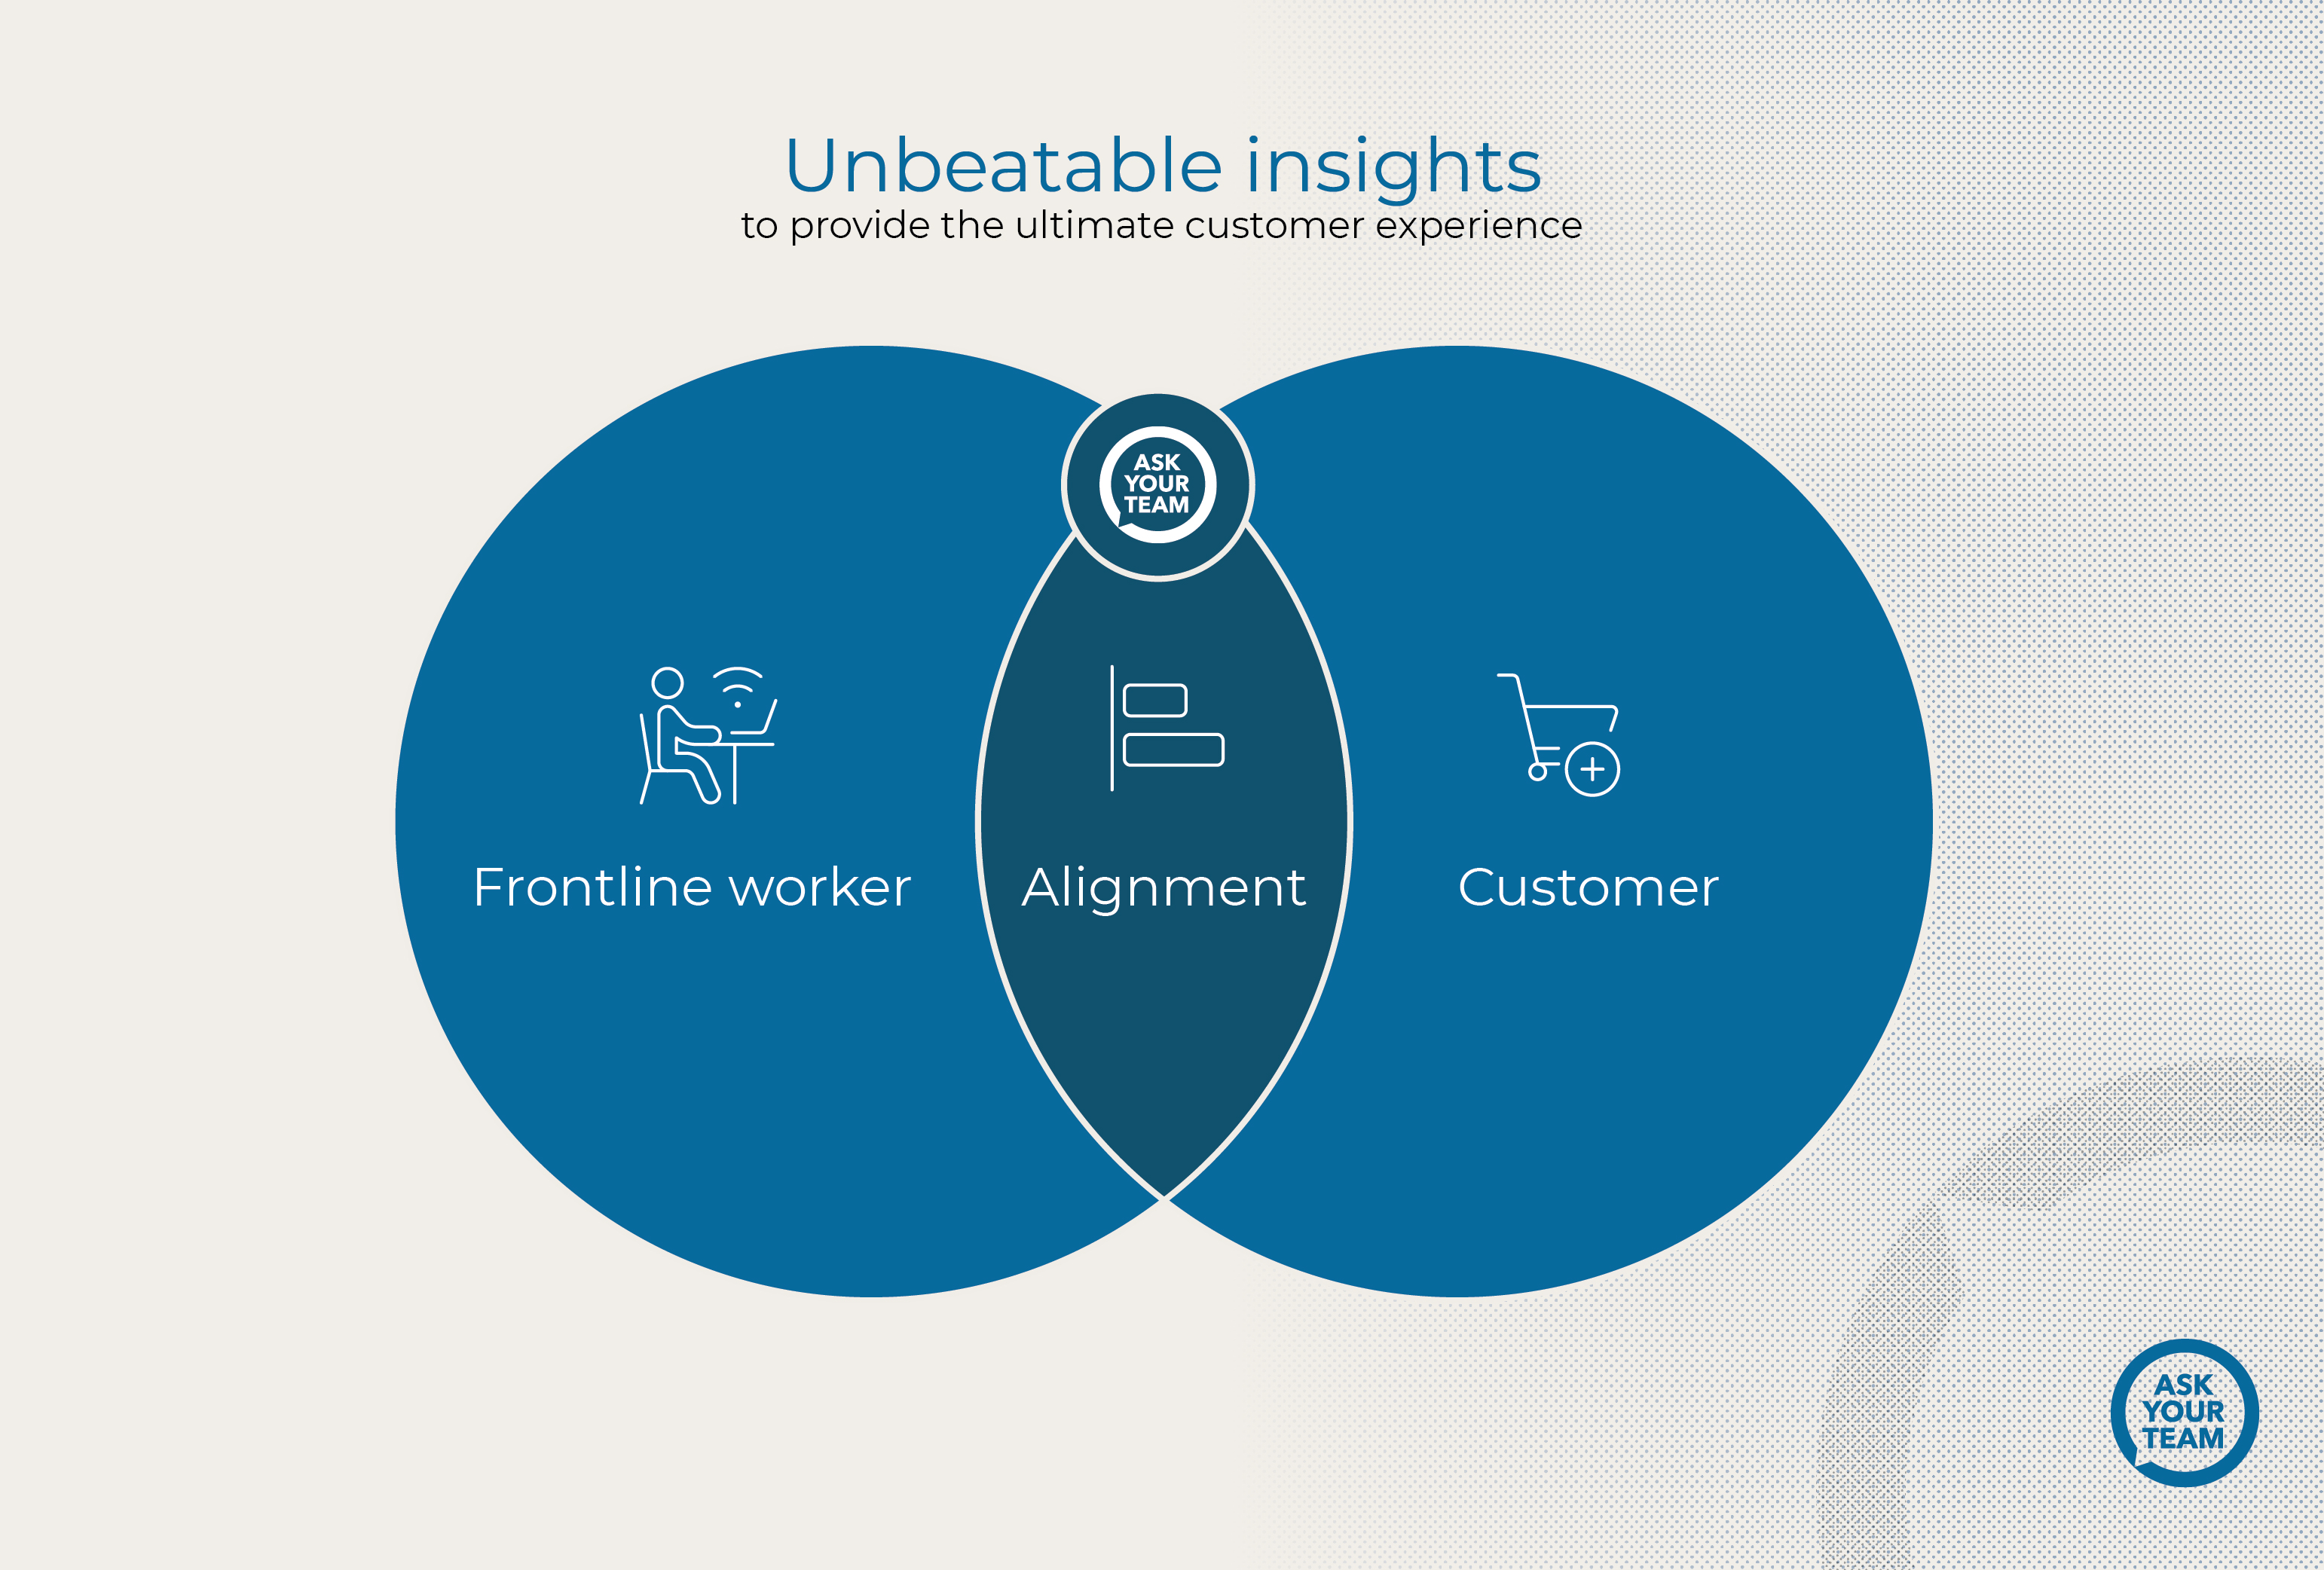 Unbeatable insights for next level customer experience